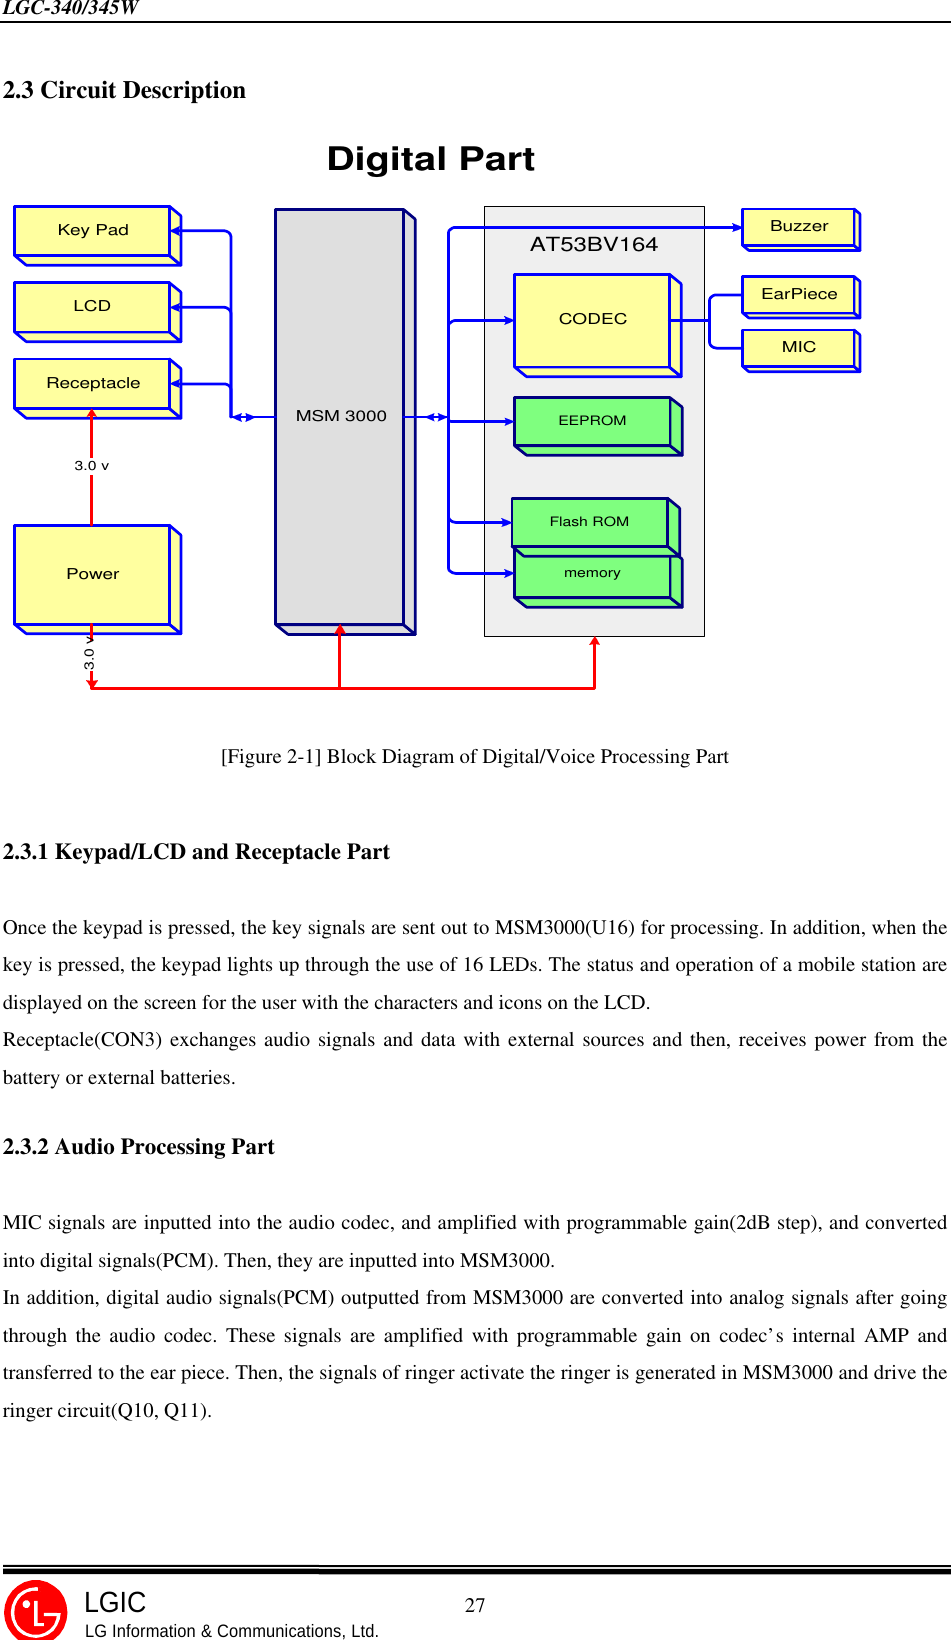 LGC-340/345W                                            27LGICLG Information &amp; Communications, Ltd.2.3 Circuit Description[Figure 2-1] Block Diagram of Digital/Voice Processing Part2.3.1 Keypad/LCD and Receptacle PartOnce the keypad is pressed, the key signals are sent out to MSM3000(U16) for processing. In addition, when thekey is pressed, the keypad lights up through the use of 16 LEDs. The status and operation of a mobile station aredisplayed on the screen for the user with the characters and icons on the LCD.Receptacle(CON3) exchanges audio signals and data with external sources and then, receives power from thebattery or external batteries.2.3.2 Audio Processing PartMIC signals are inputted into the audio codec, and amplified with programmable gain(2dB step), and convertedinto digital signals(PCM). Then, they are inputted into MSM3000.In addition, digital audio signals(PCM) outputted from MSM3000 are converted into analog signals after goingthrough the audio codec. These signals are amplified with programmable gain on codec’s internal AMP andtransferred to the ear piece. Then, the signals of ringer activate the ringer is generated in MSM3000 and drive theringer circuit(Q10, Q11).AT53BV164Digital PartMSM 3000memoryFlash ROMEEPROMCODECKey PadReceptacleLCDMICBuzzerEarPiecePower3.0 v3.0 v